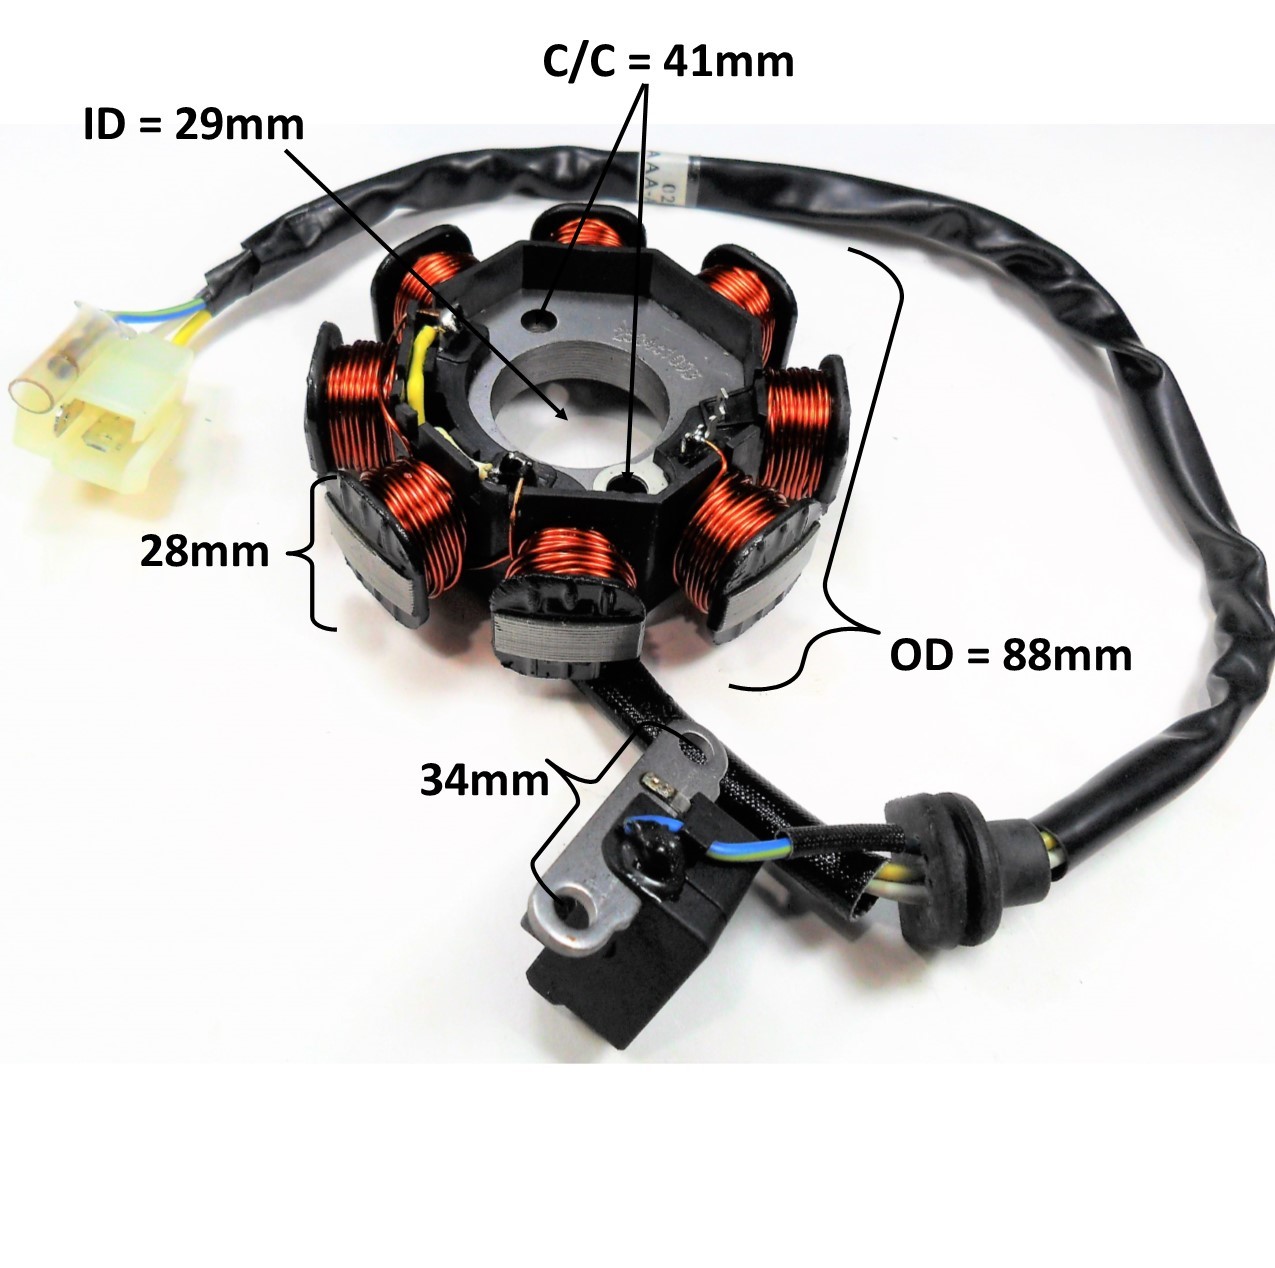 Stator 49-150cc 4 Stroke Fits E-Ton Sport 50, Tomos Nitro 50, 49cc Scooters + More. 8 Coil 2 Pin in 3 Pin Jack + 1 Wire OD=88 ID=29 H=28 Bolts c/c=41 Pickup Coil c/c=34